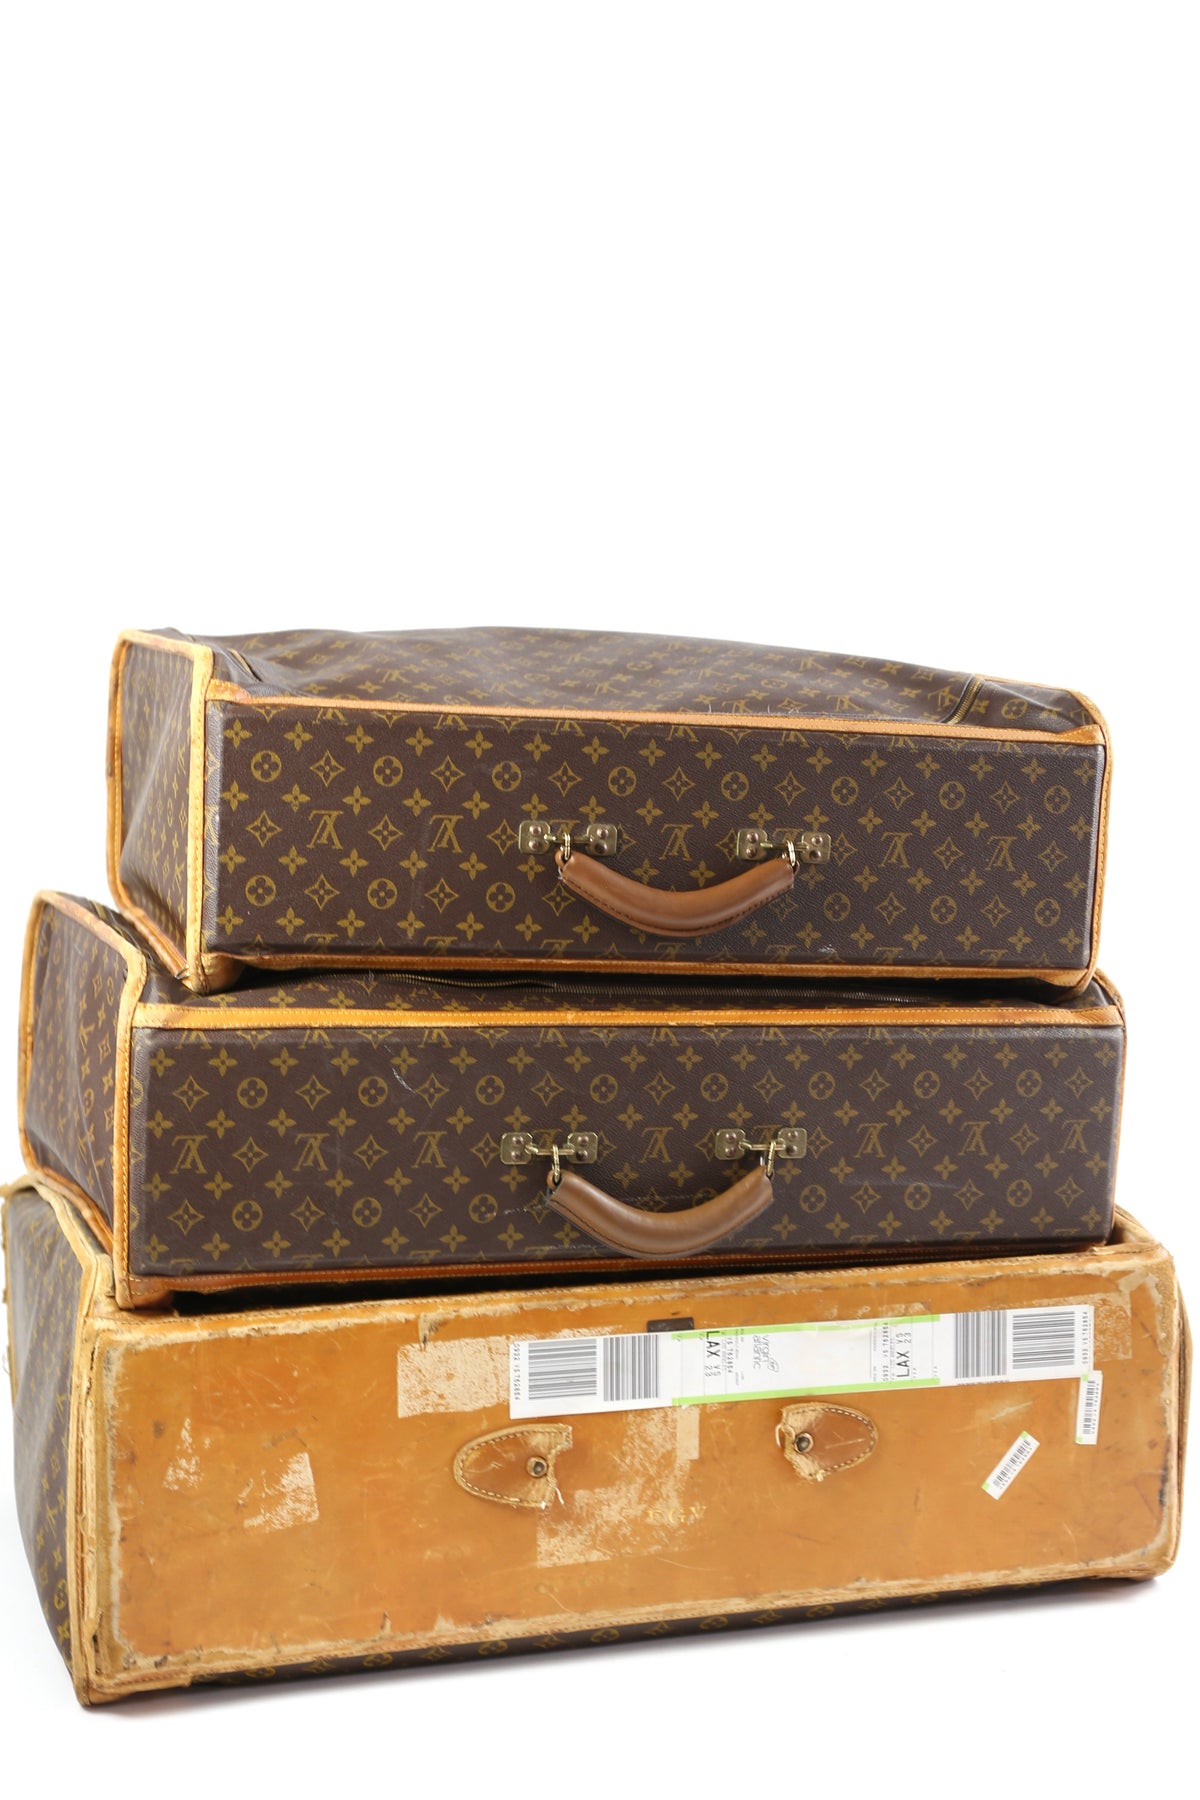 Louis Vuitton Luggage Set - 6 For Sale on 1stDibs  louis vuitton luggage  sets, louis vuitton luggage set for sale, louis vuitton suitcase set price